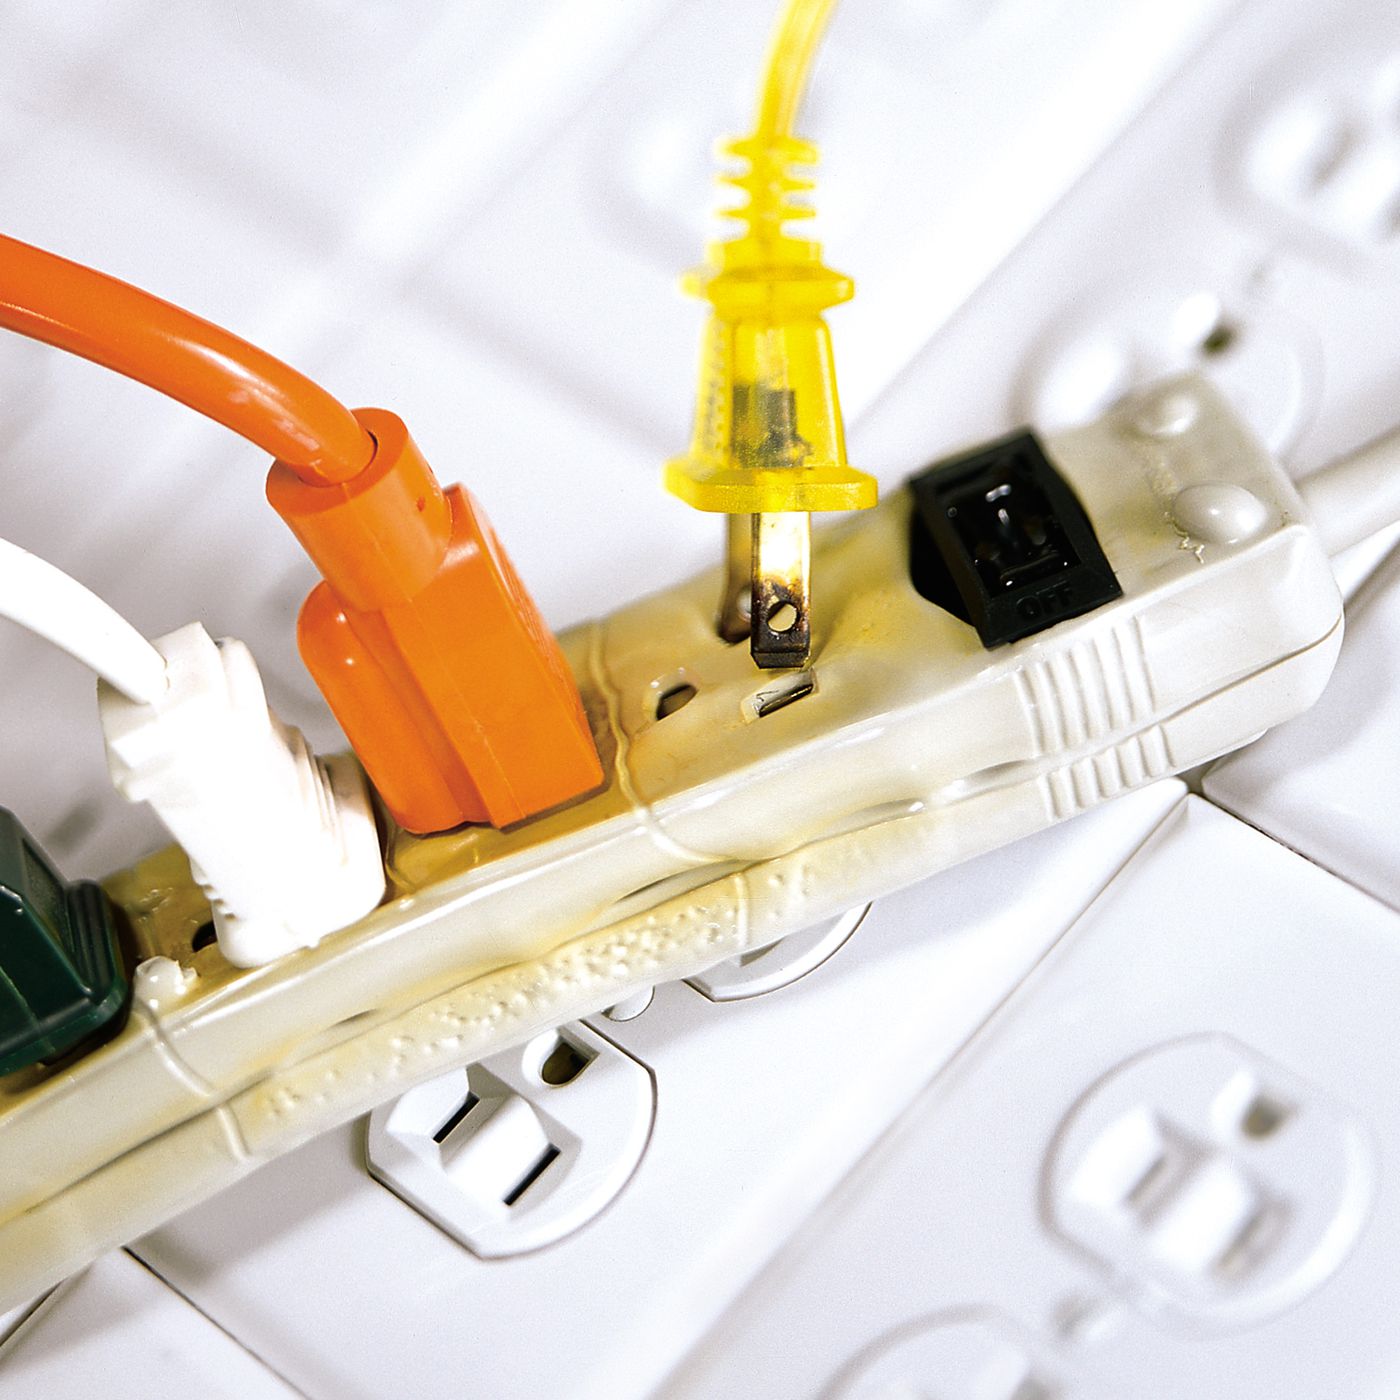 What Should You Not Plug Into A Surge Protector?